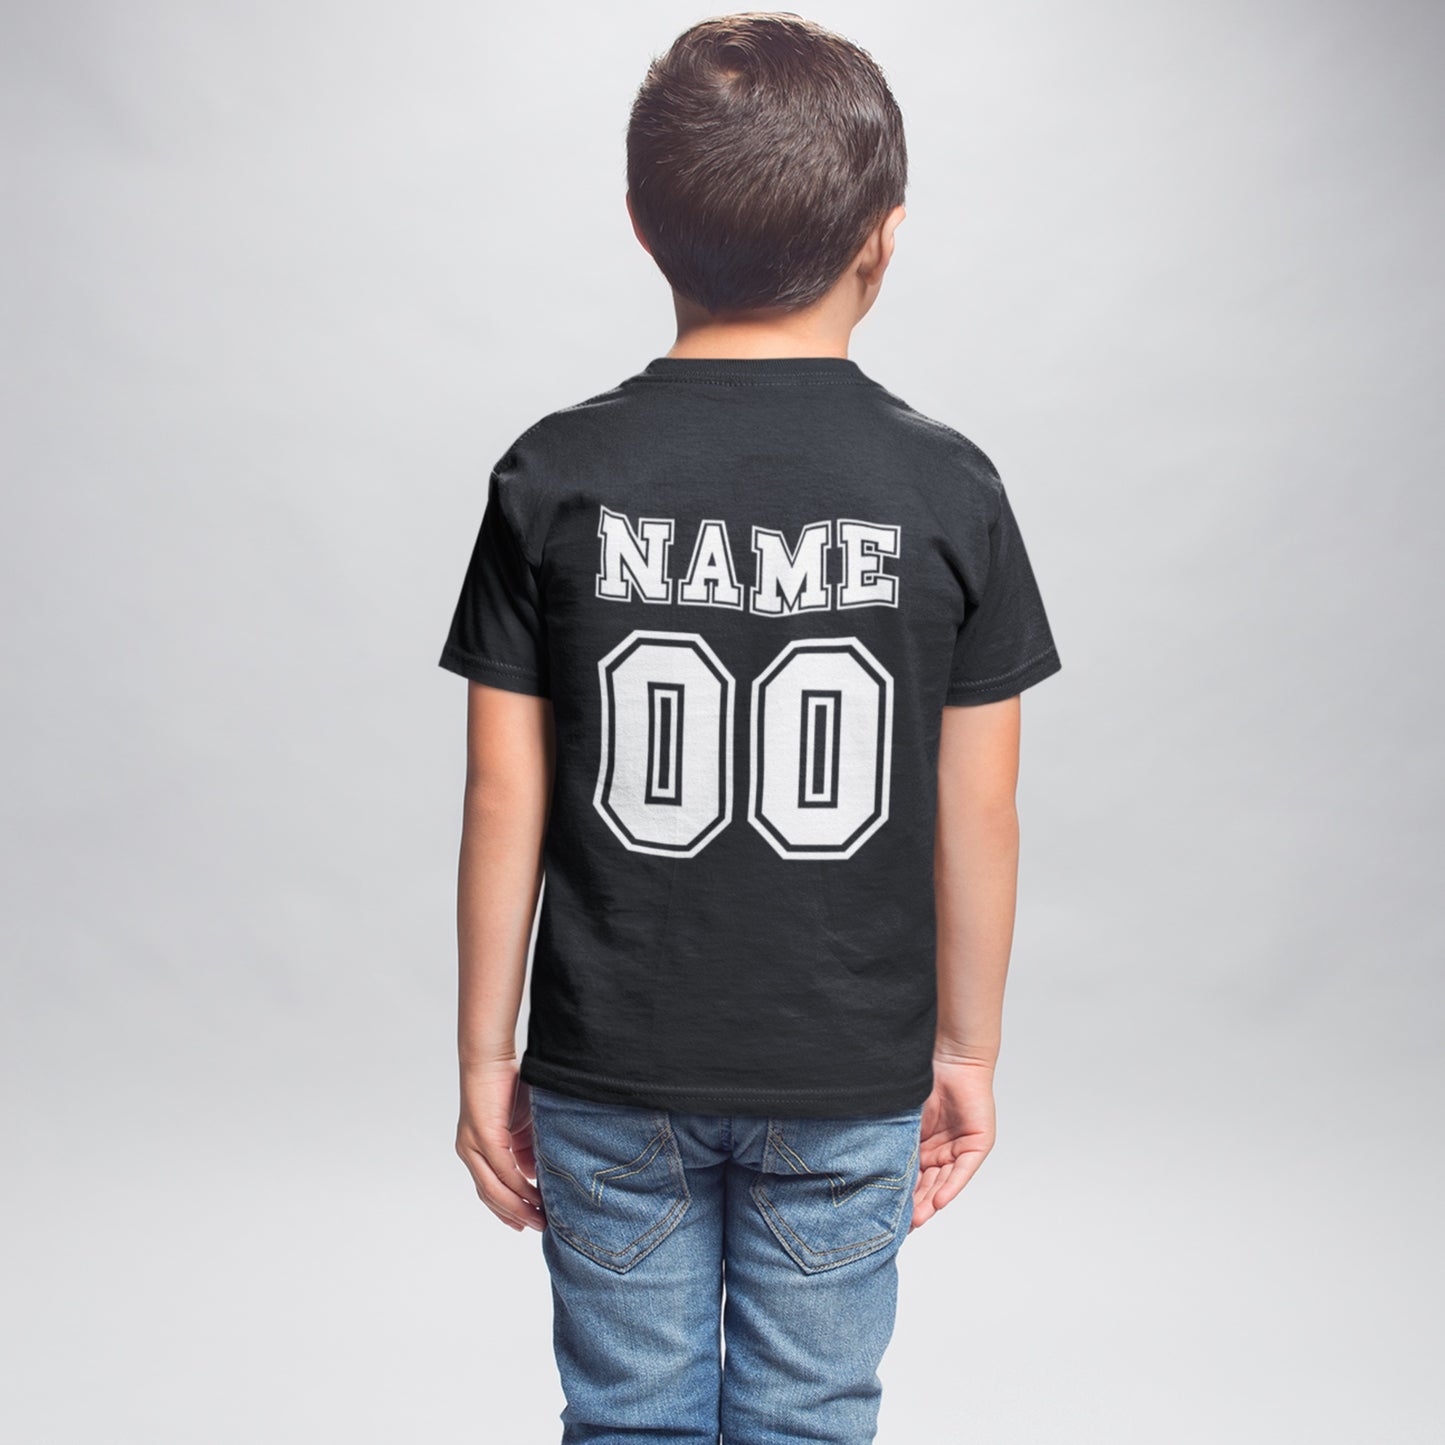 Family Custom Name Shirts, Custom Any Name, Custom Any Number Shirt, Personalized Father Mother Daughter Son Matching Shirts, Squad Shirts Etsy